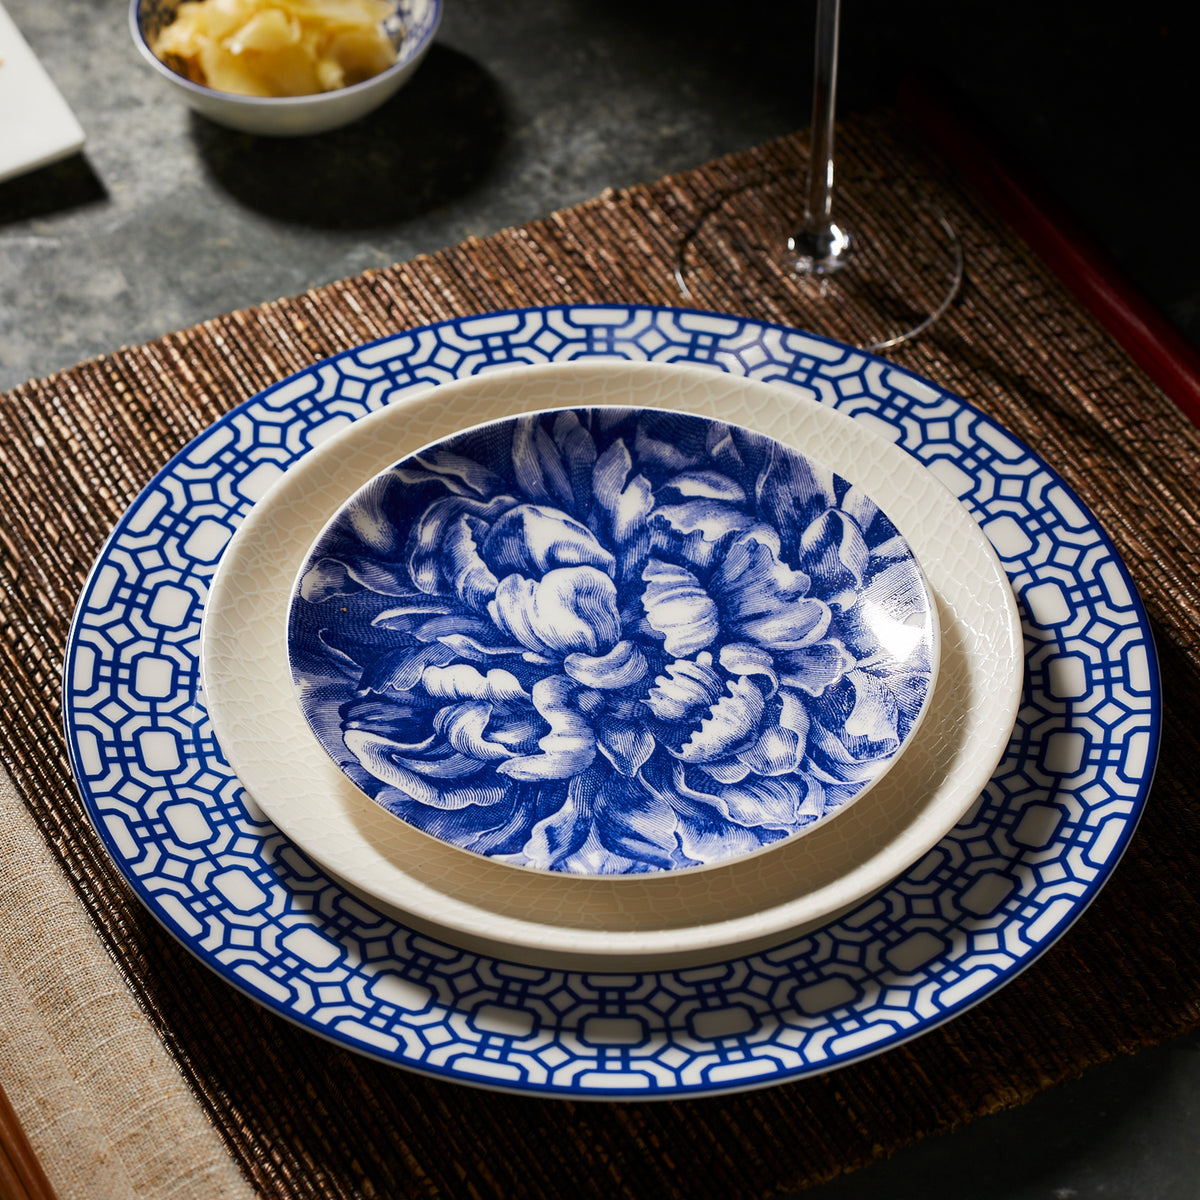 A close-up of a table setting features three nested plates from the coastal collections: a blue and white floral-patterned small bowl, a plain off-white middle plate, and a large Caskata Artisanal Home Newport Garden Gate Rimmed Dinner Plate with blue and white geometric patterns.